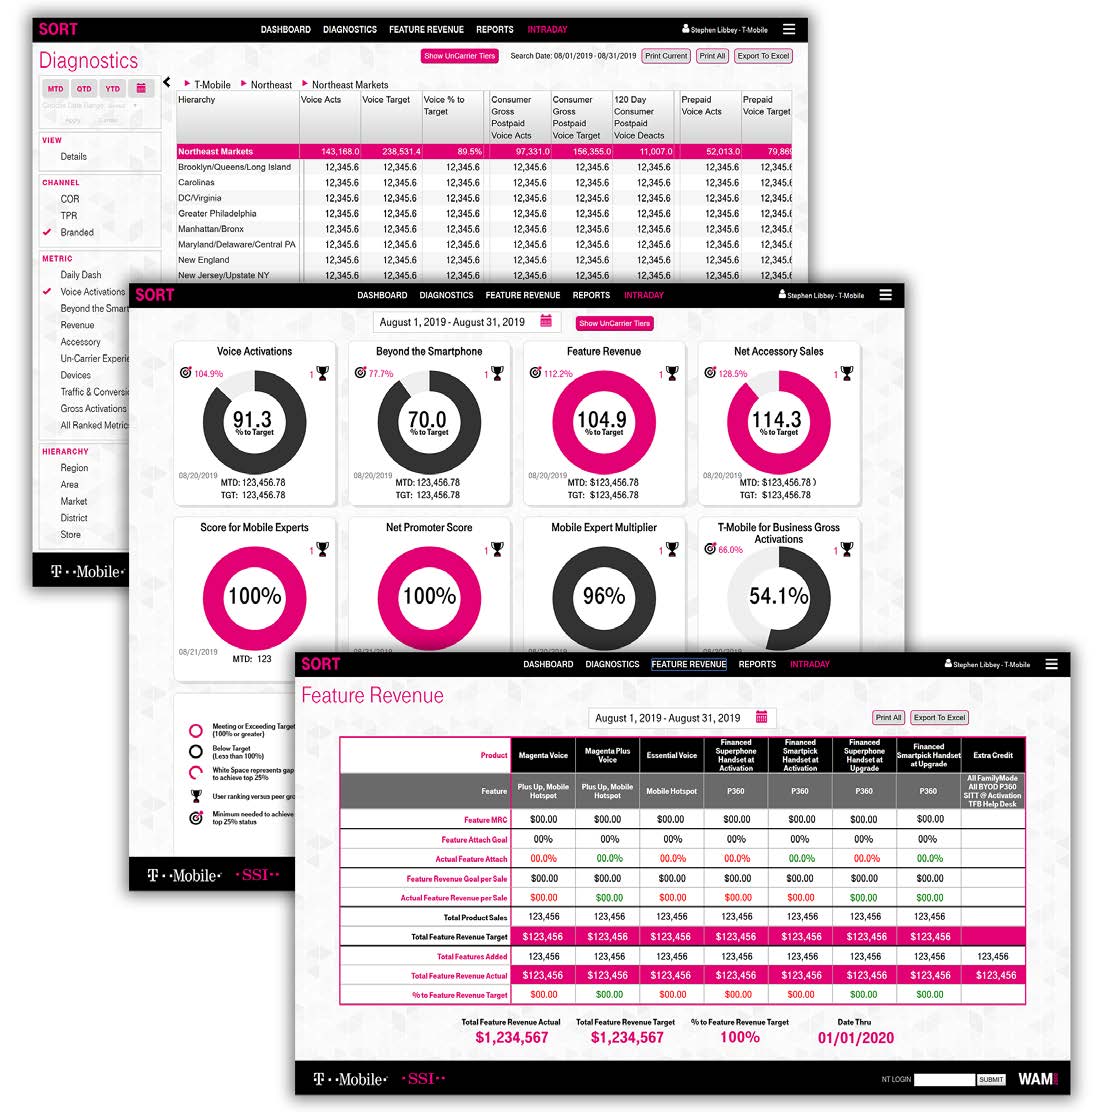 t-mobile INTERNAL SALES APPLICATION Design + Implementation 2016-2020 I was brought onboard by T-Mobile in 2016 as a Senior UX Software Engineer to work on their internal sales applications, used by thousands of management and executive level users for business intelligence. I determined with leadership the user needs on all levels of access, designing a UI that made the app serve both current and predicted forms of data. Then my team and I implemented an MVC UI using Angular. I conceptualized a scalable platform to by reused every time a new internal app was needed. Our team was the first to adopt Agile Scrum methodology, which became the template for the entire department. I assisted data analysts in maintaining and upgrading the application until we sunsetted it in 2020. (Screenshots used with permission)